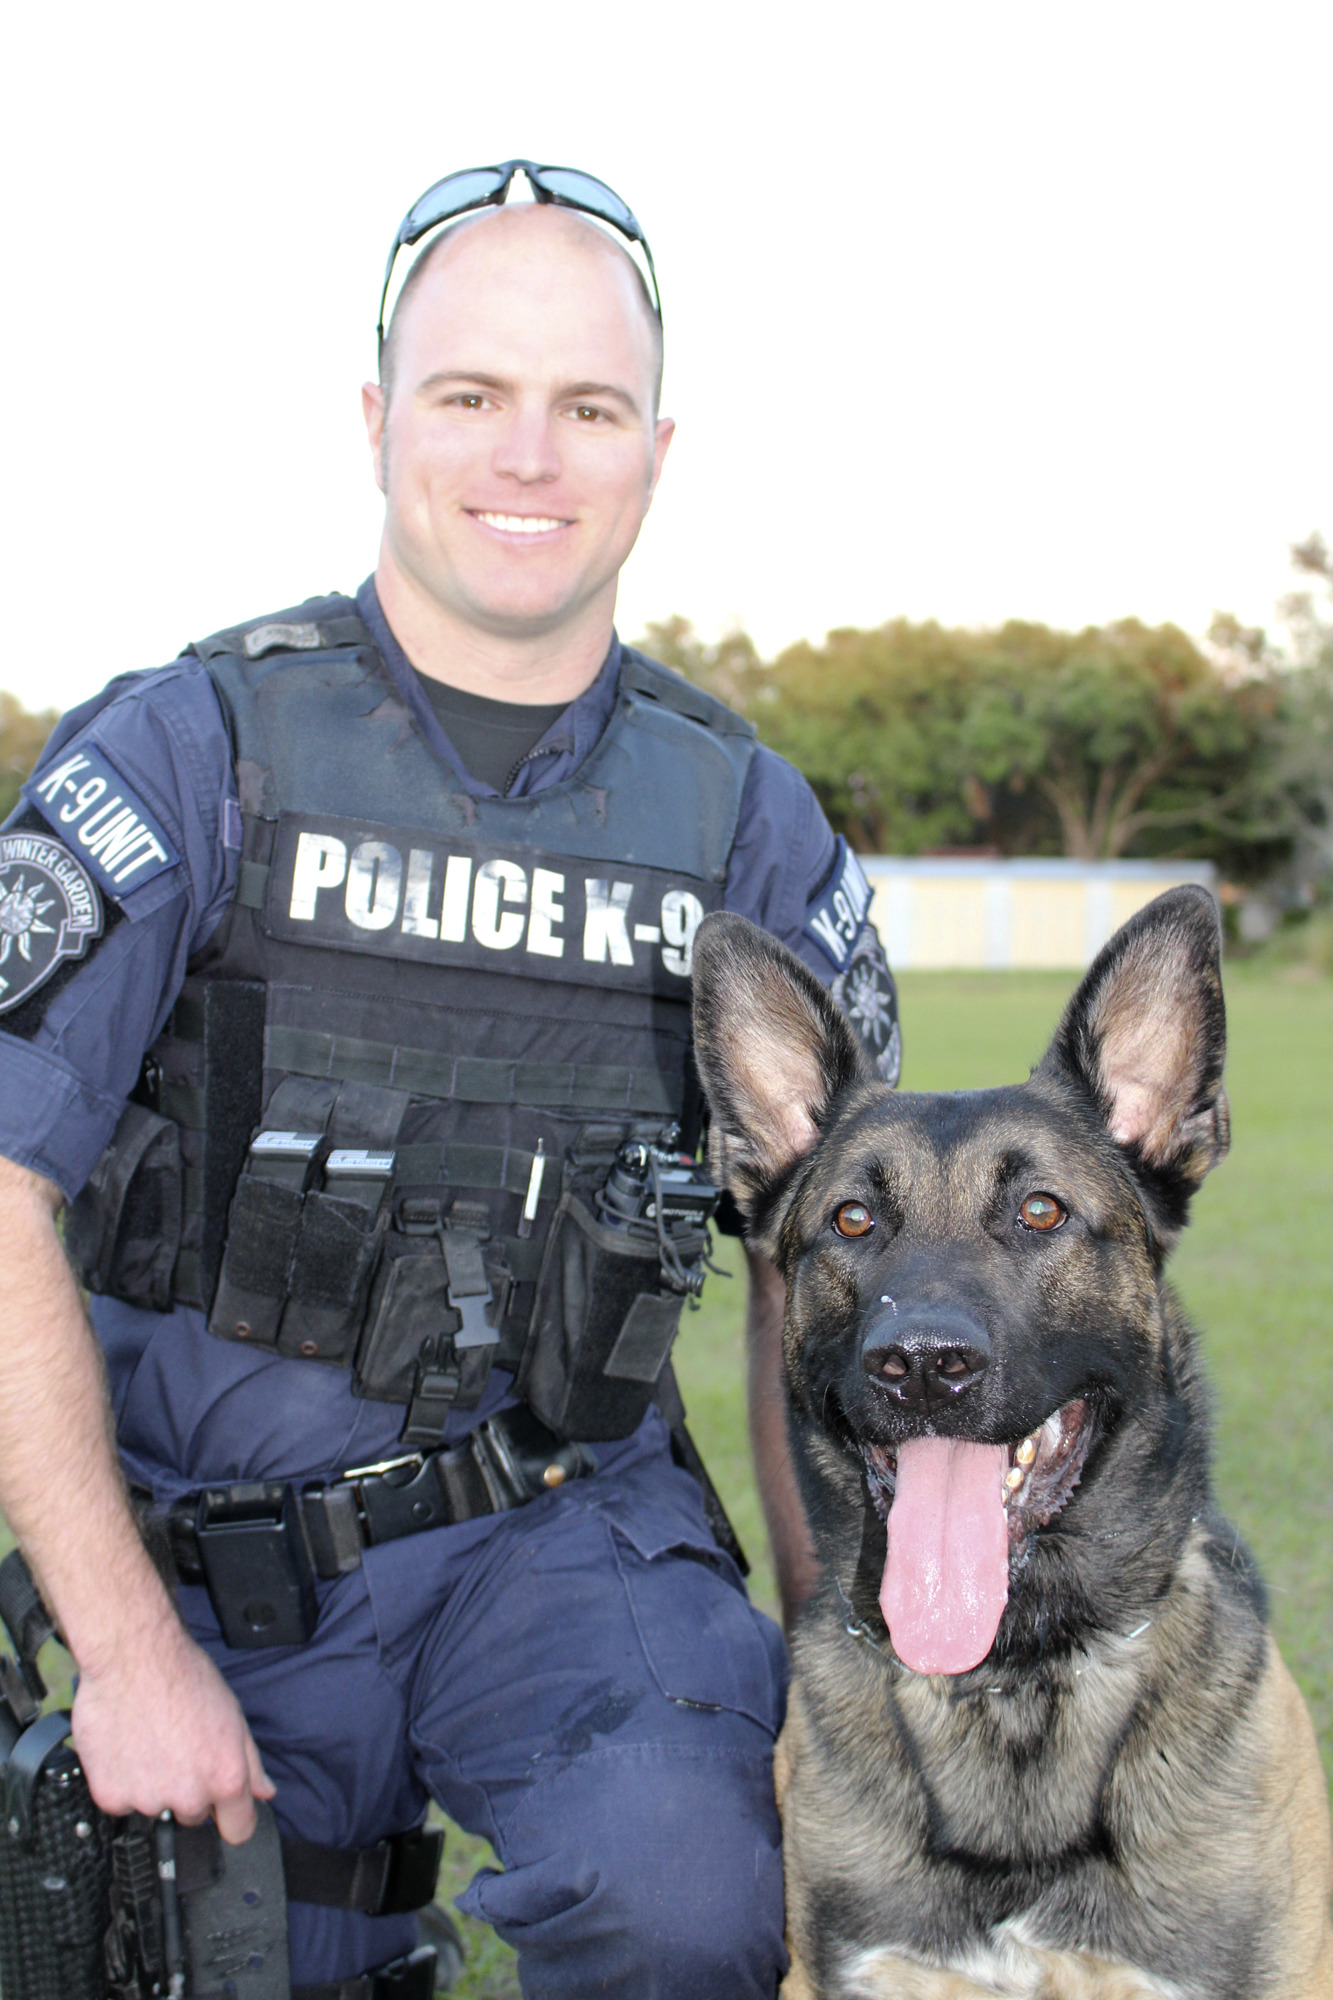 K-9 Mack, from Hungary, and W.G. police officer Matthew “Beau” Griffin would give their lives for each other. “To the agency, he’s a tool and an investment ... Mack is like a kid to me more than he is just a tool.